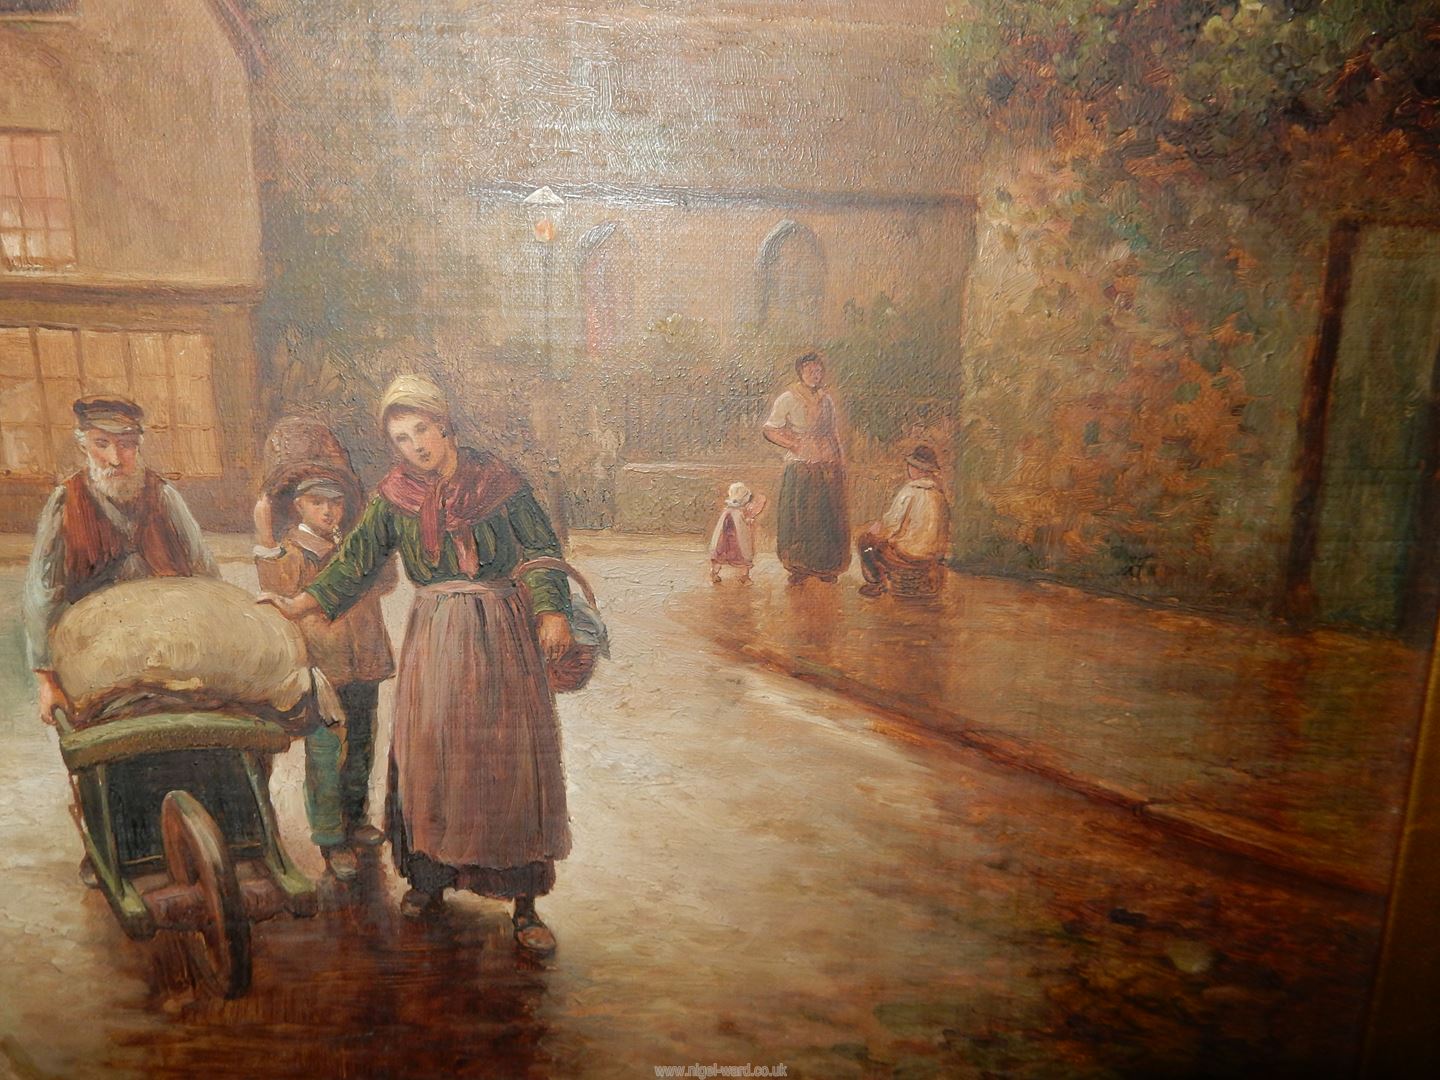 A large gilt framed Oil on canvas of a Village with figures walking down a street, - Image 6 of 7